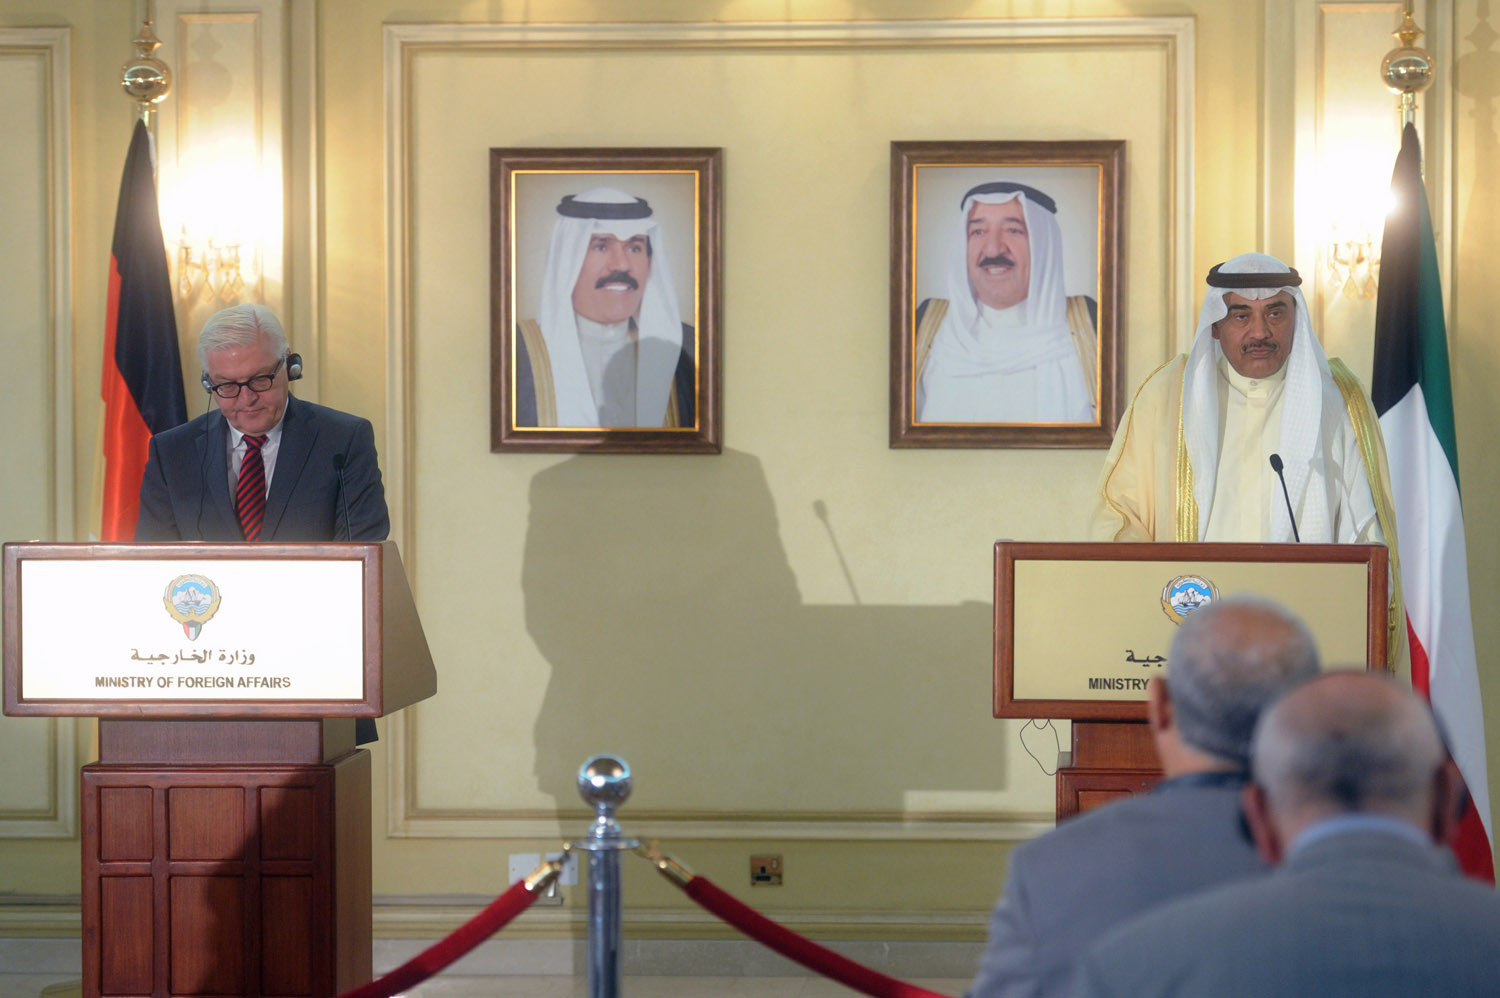 Acting Prime Minister and Foreign Minister Sheikh Sabah Al-Khaled Al-Hamad Al-Sabah and German Foreign Minister Frank-Walter Steinmeier during the press conference